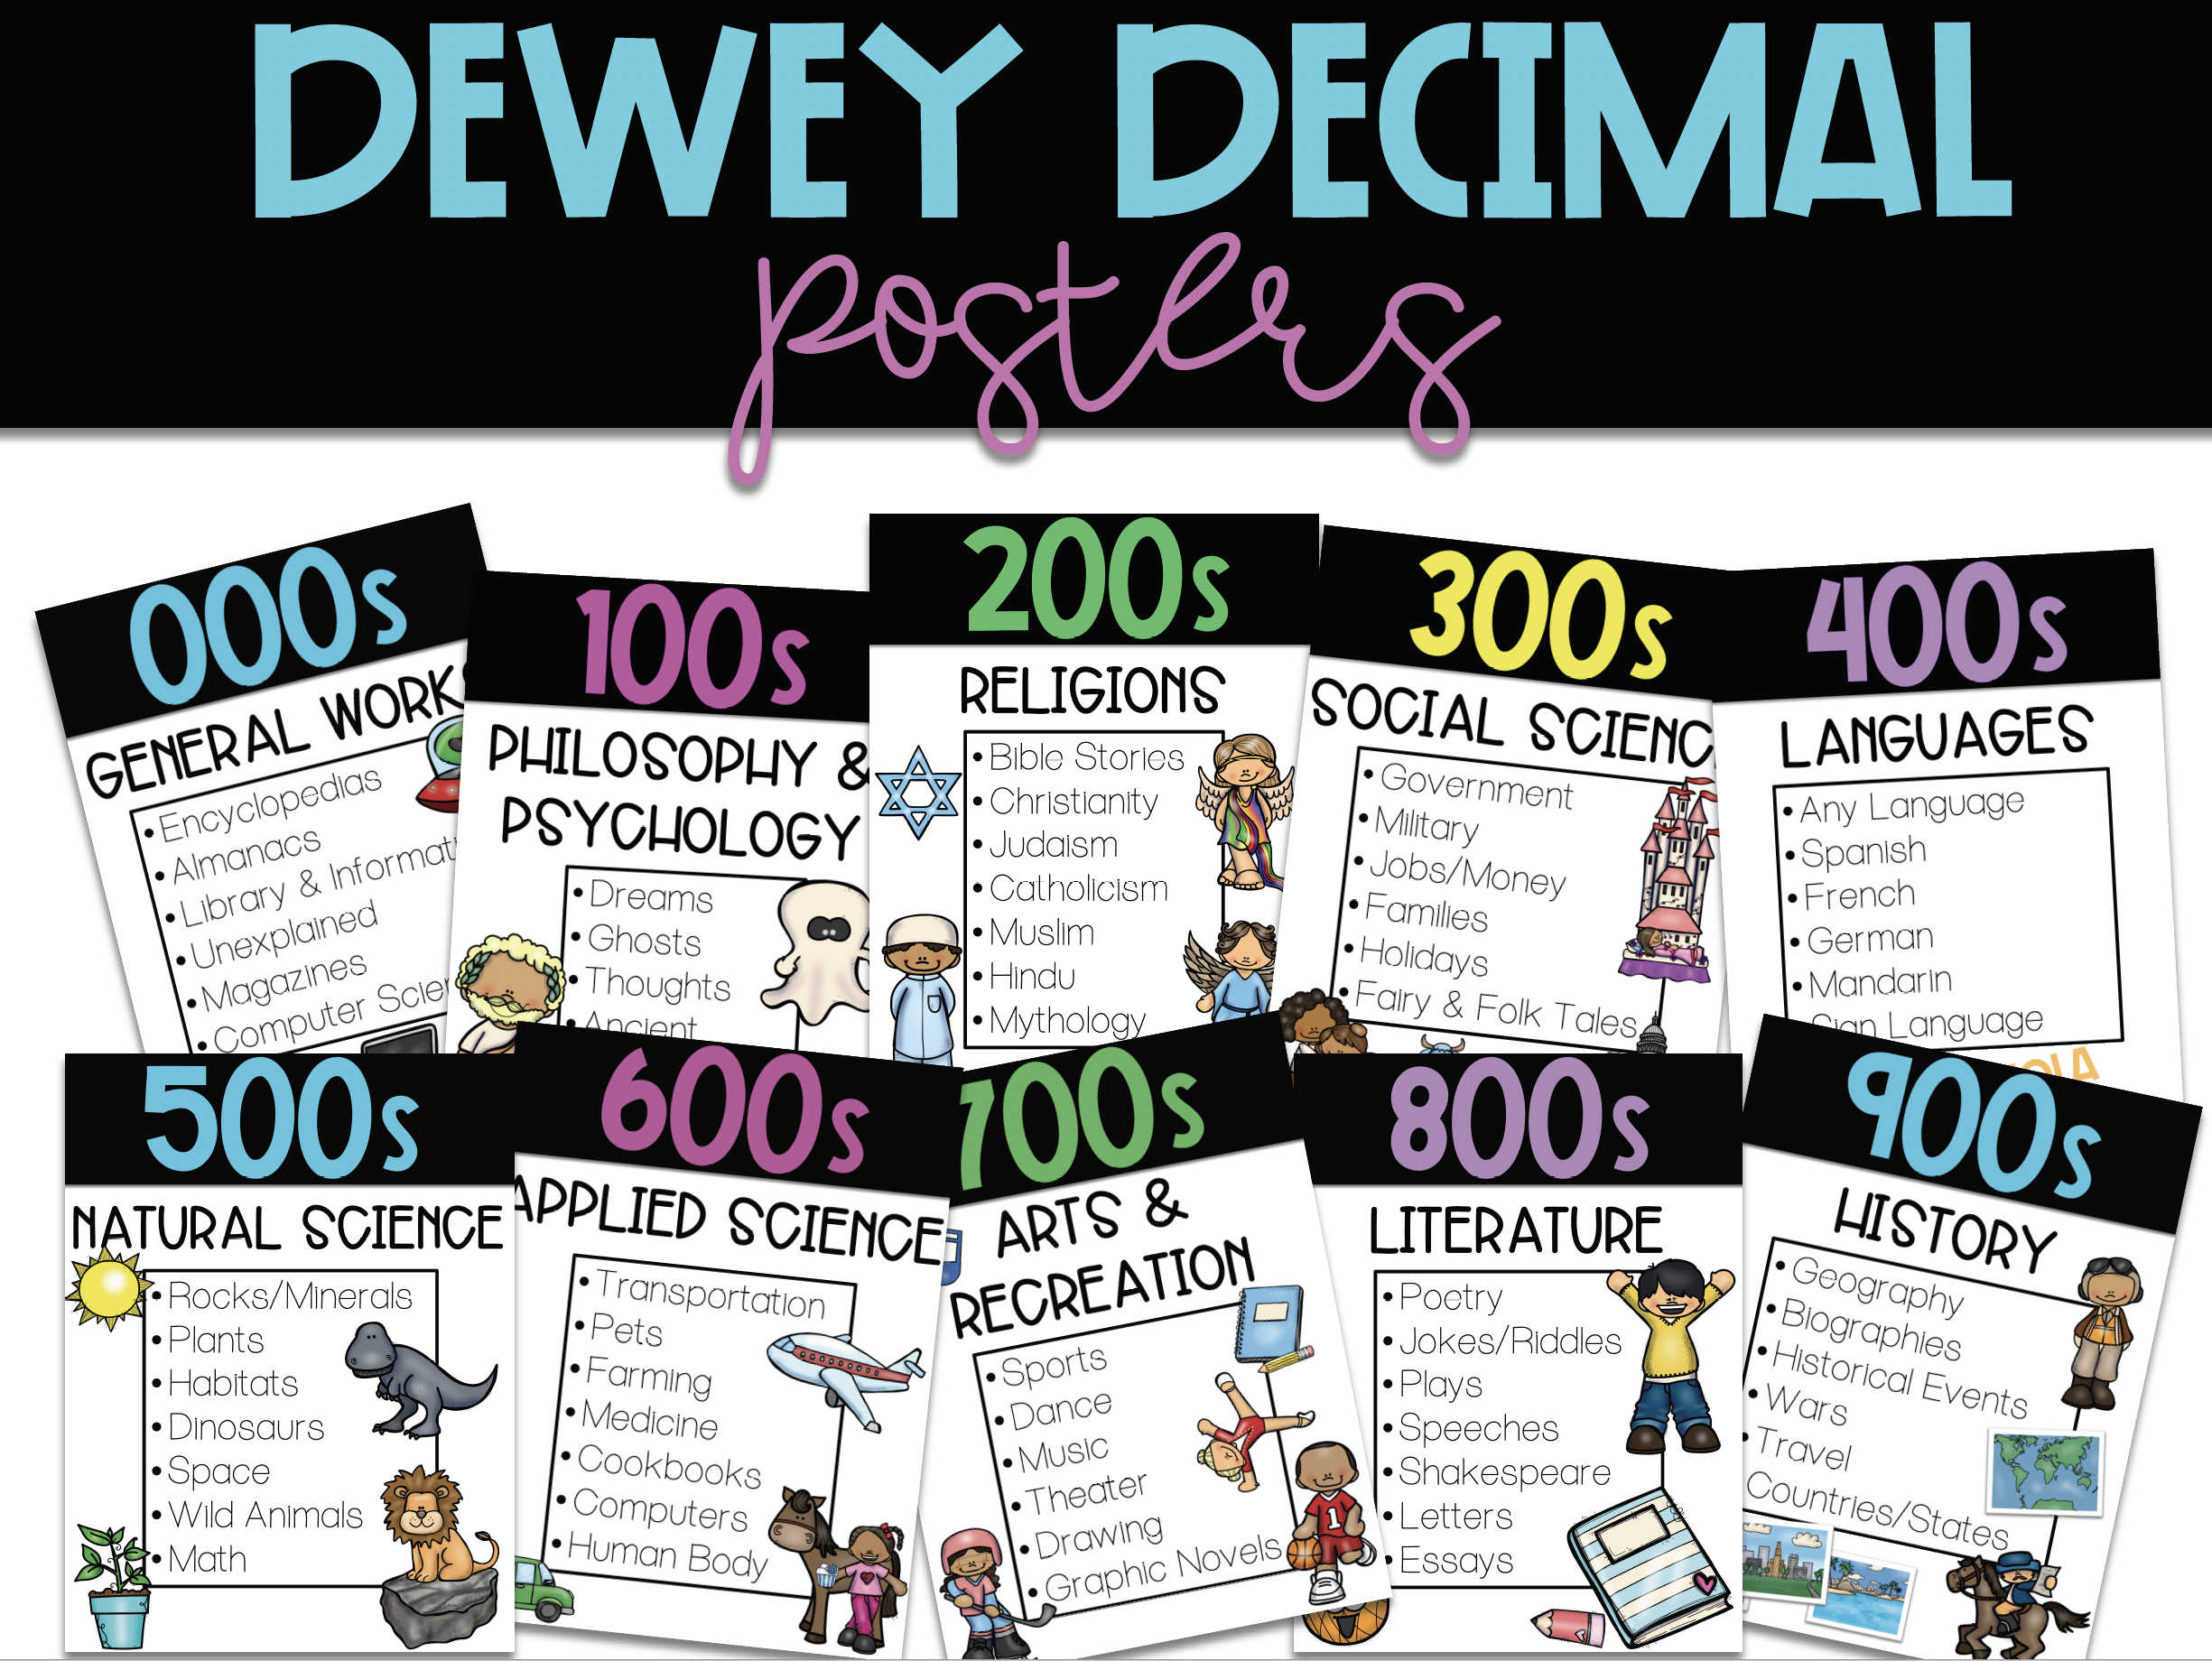 dewey-decimal-posters-image-notes-from-the-portable